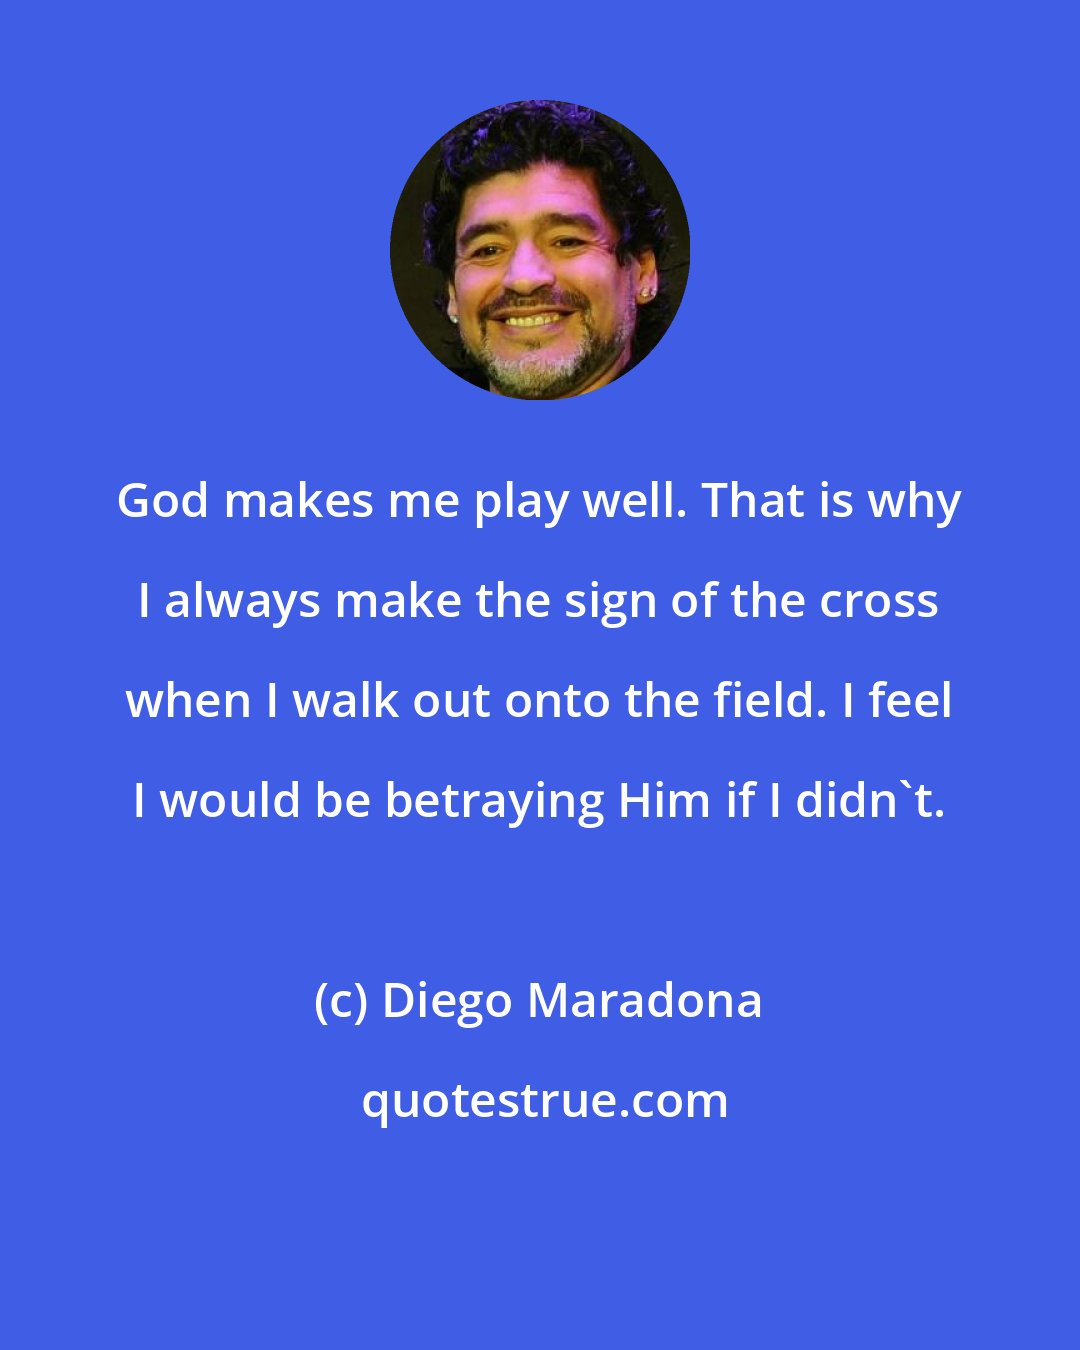 Diego Maradona: God makes me play well. That is why I always make the sign of the cross when I walk out onto the field. I feel I would be betraying Him if I didn't.